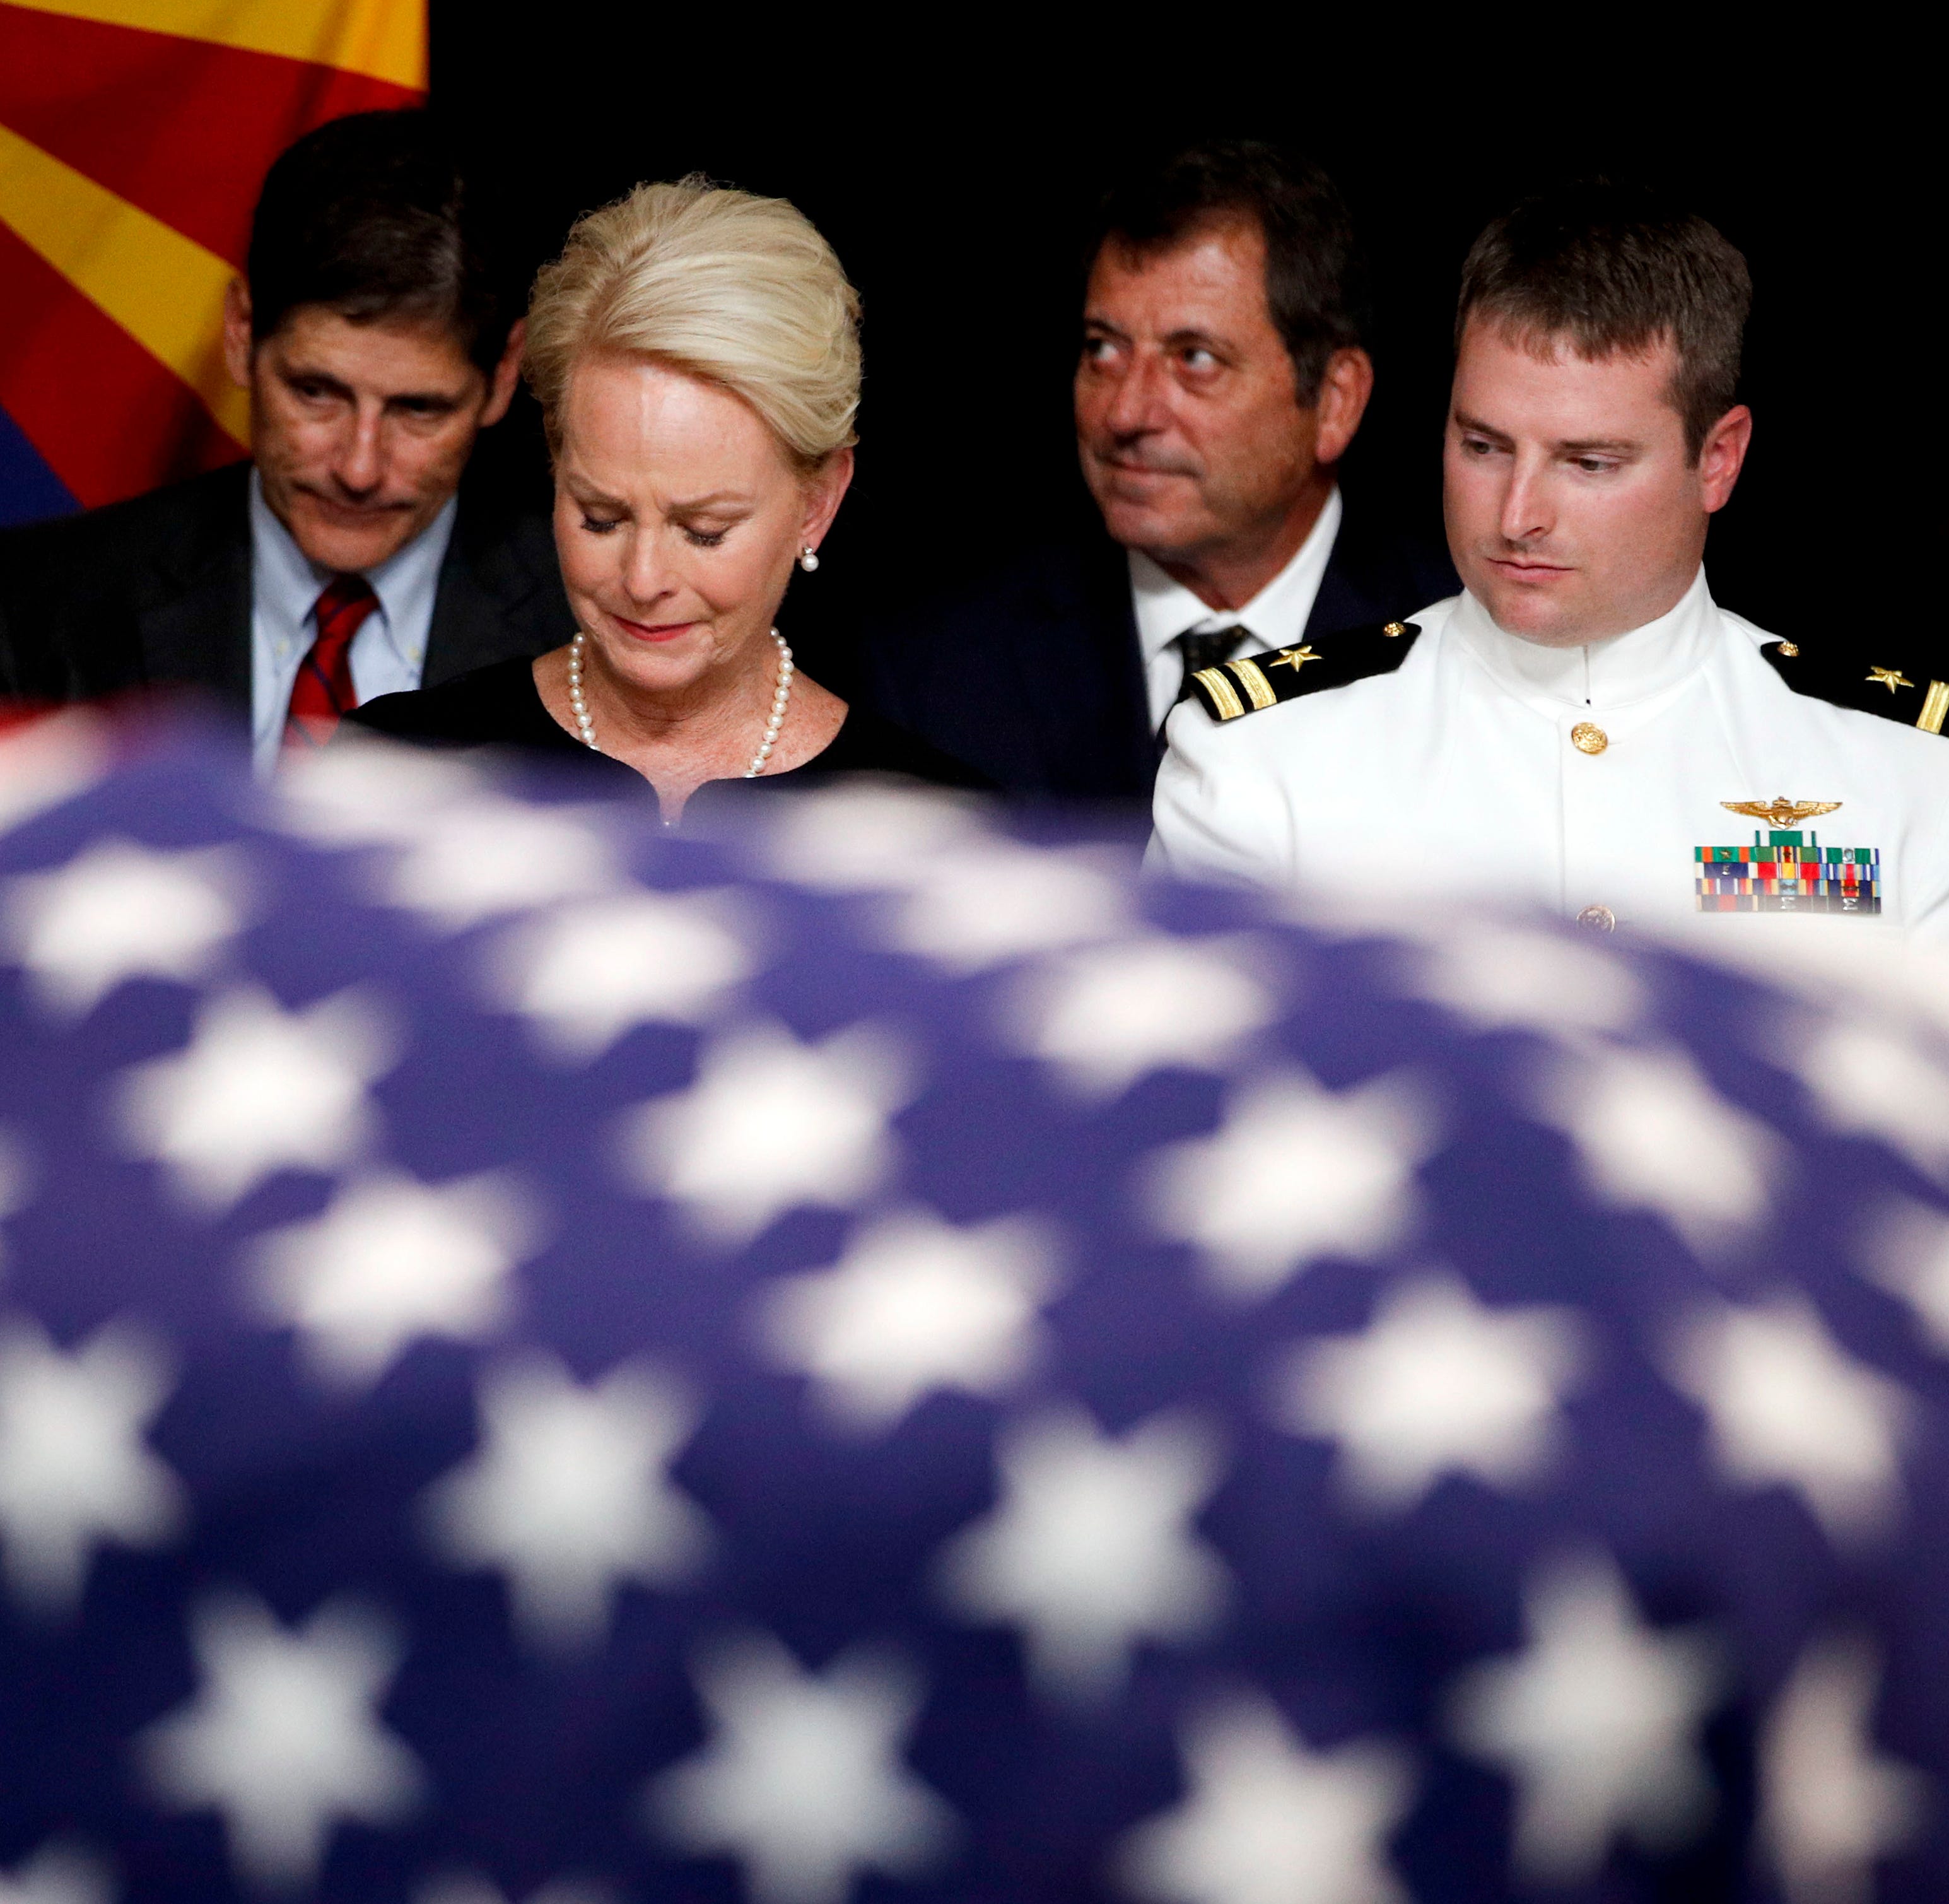 Cindy McCain, wife of Sen. John McCain, R-Ariz., sits with her son Jack during a memorial service at the Arizona Capitol on Aug. 29, 2018, in Phoenix.